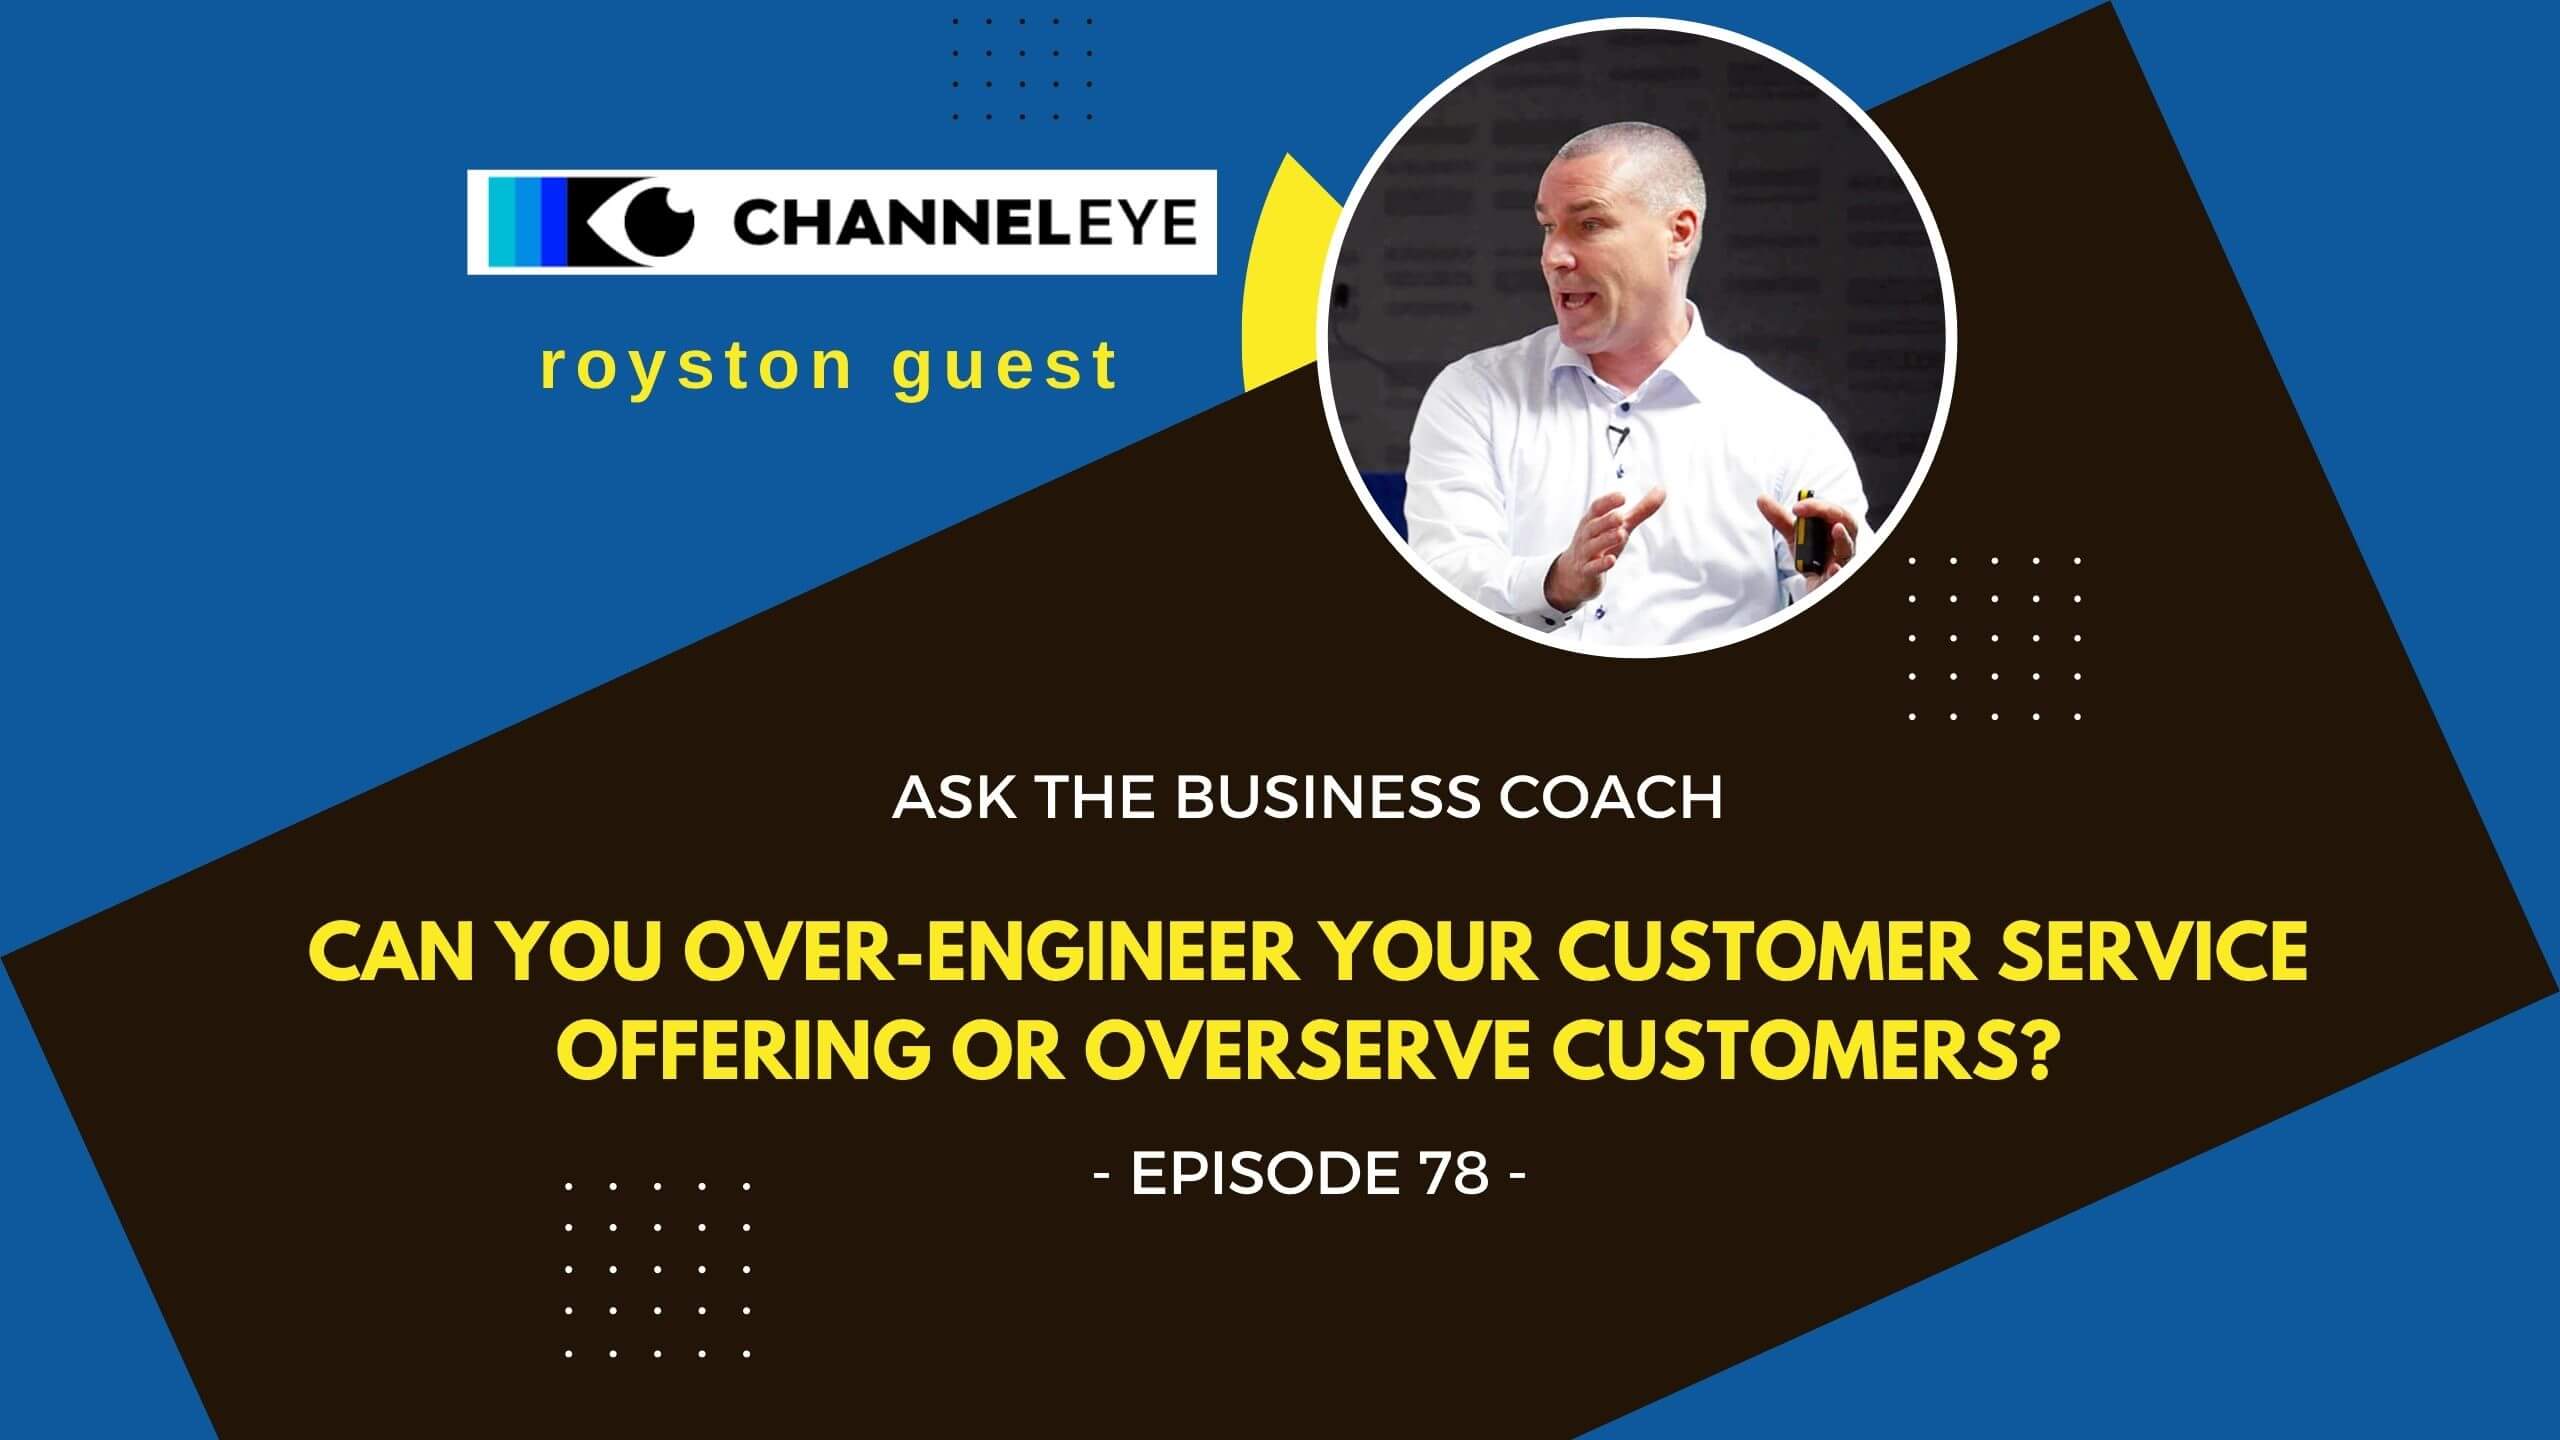 Episode 78 - Can you over-engineer your customer offering or overserve customers?